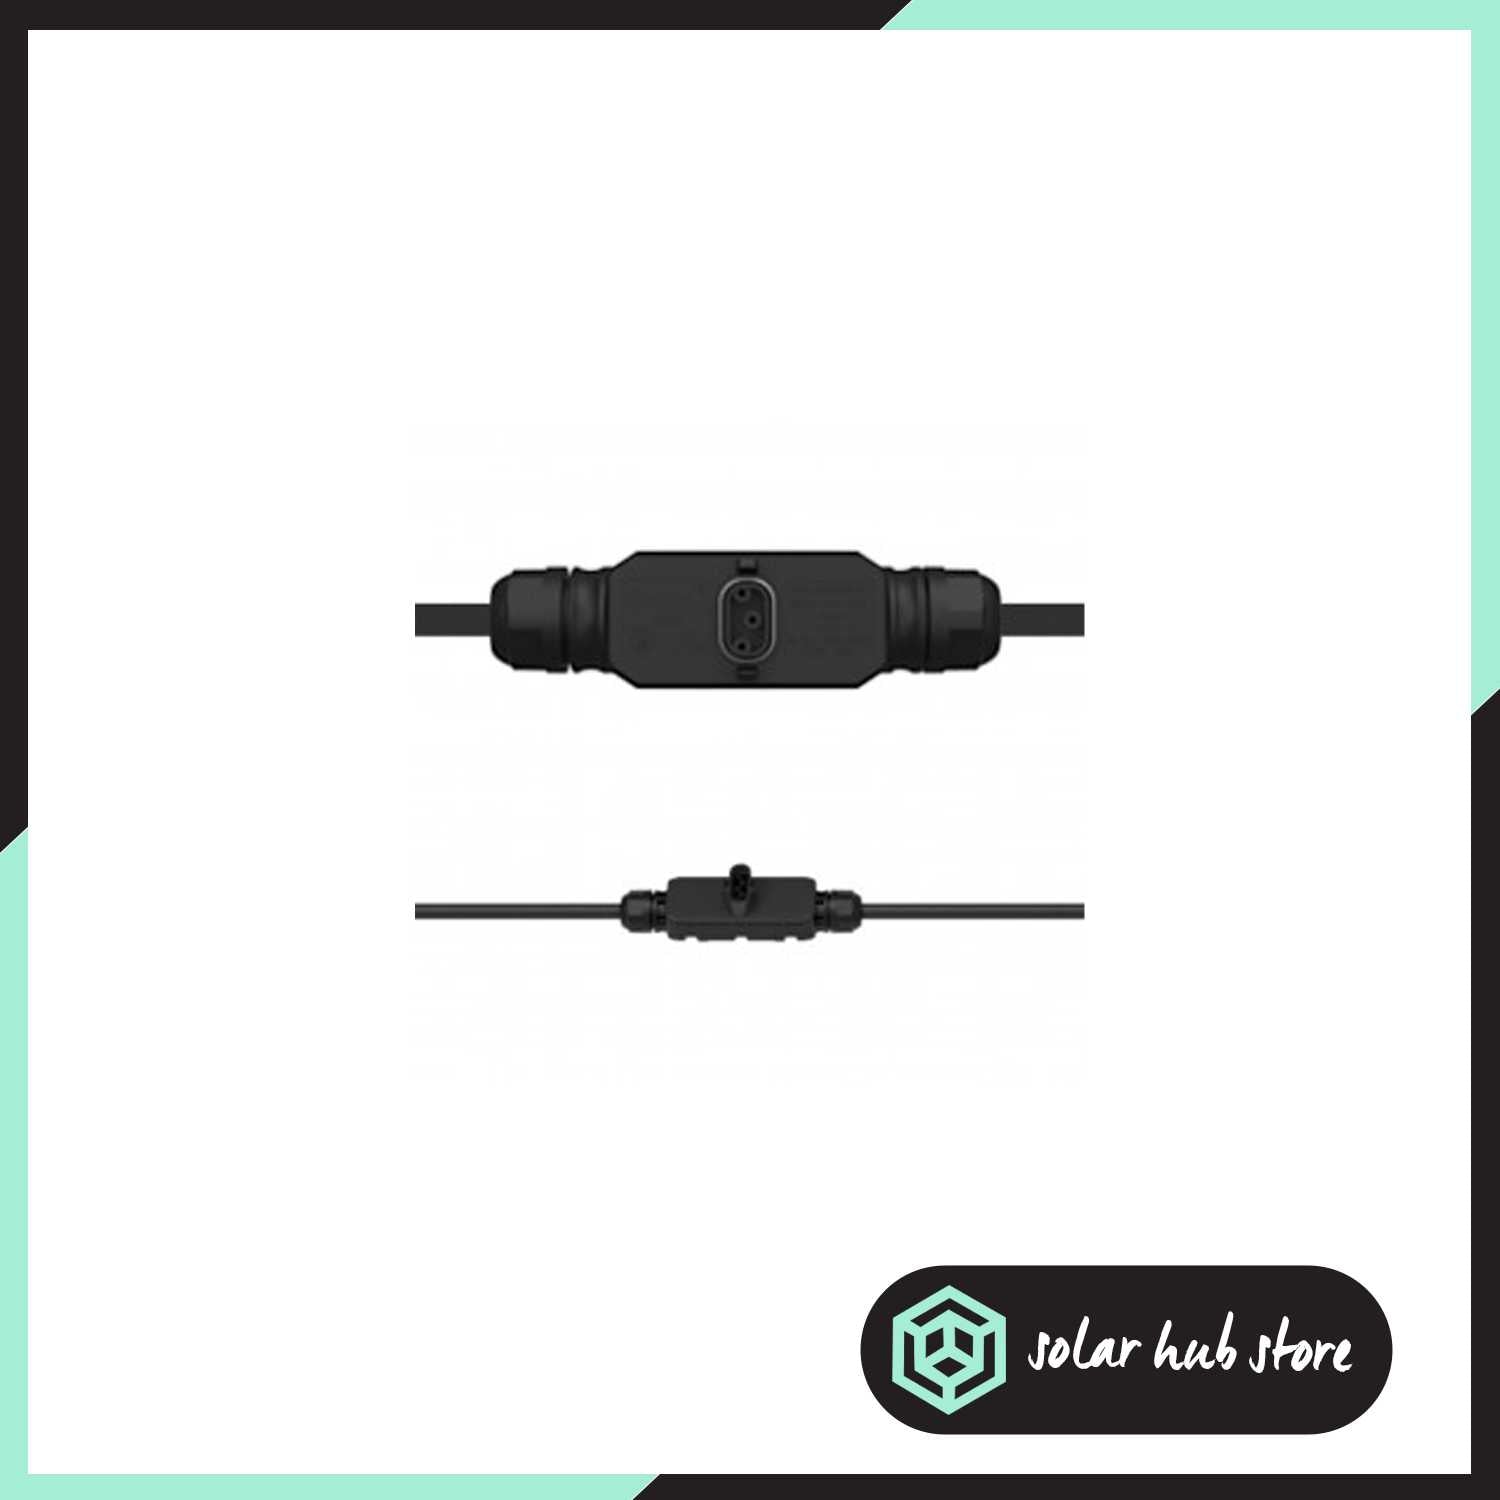 Hoymiles AC Trunk Cable 2M , 10 AWG Cable & Connector